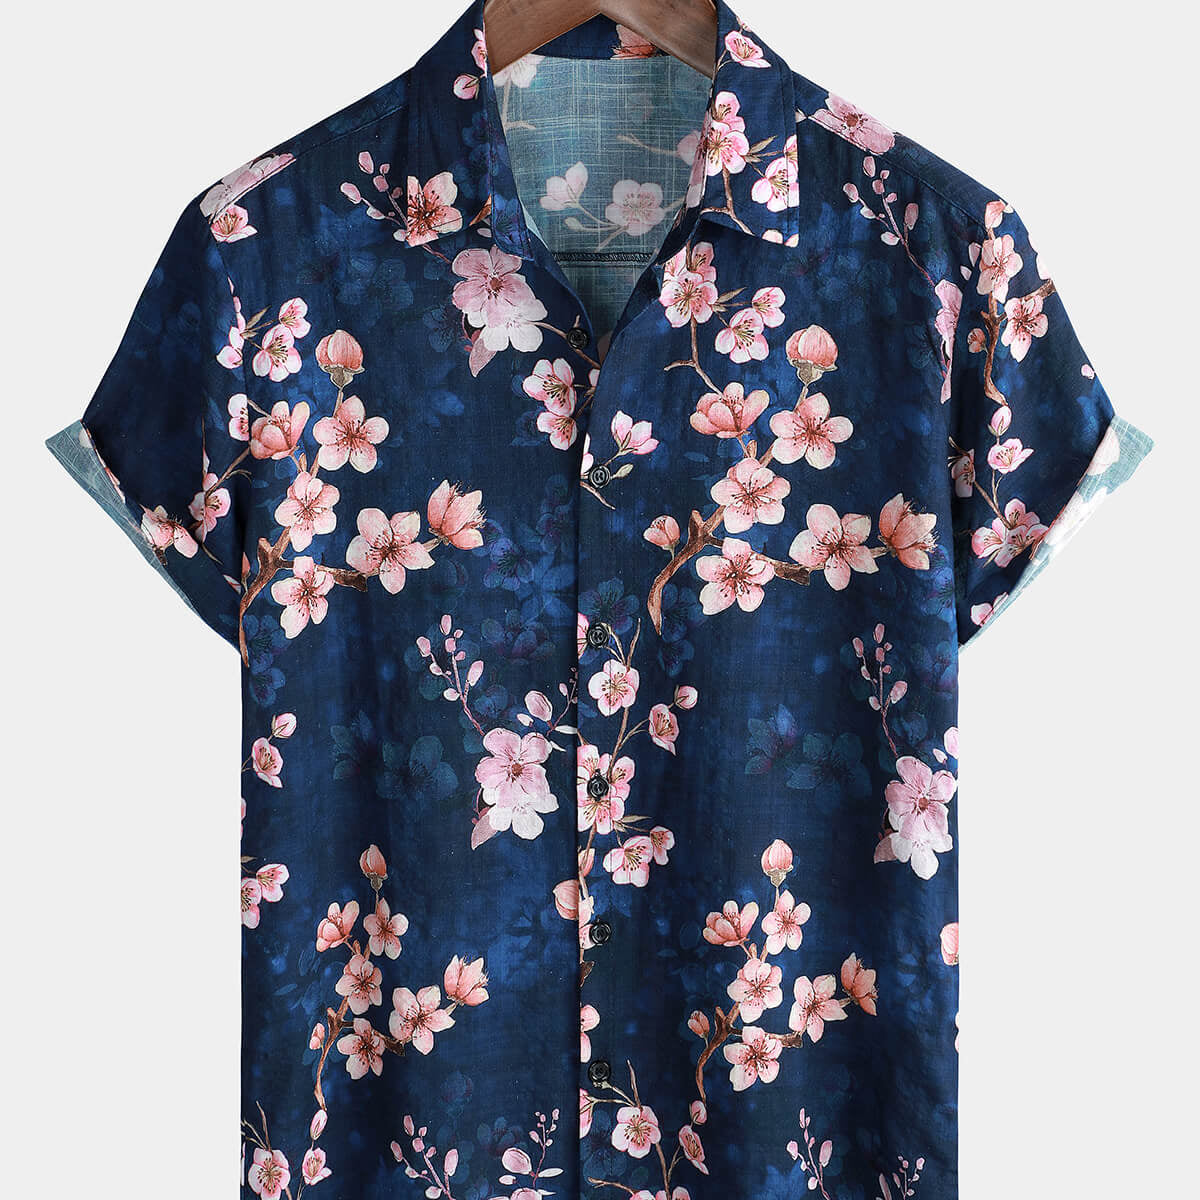 Men's Casual Cherry Blossoms Floral Holiday Beach Short Sleeve Button Up Shirt